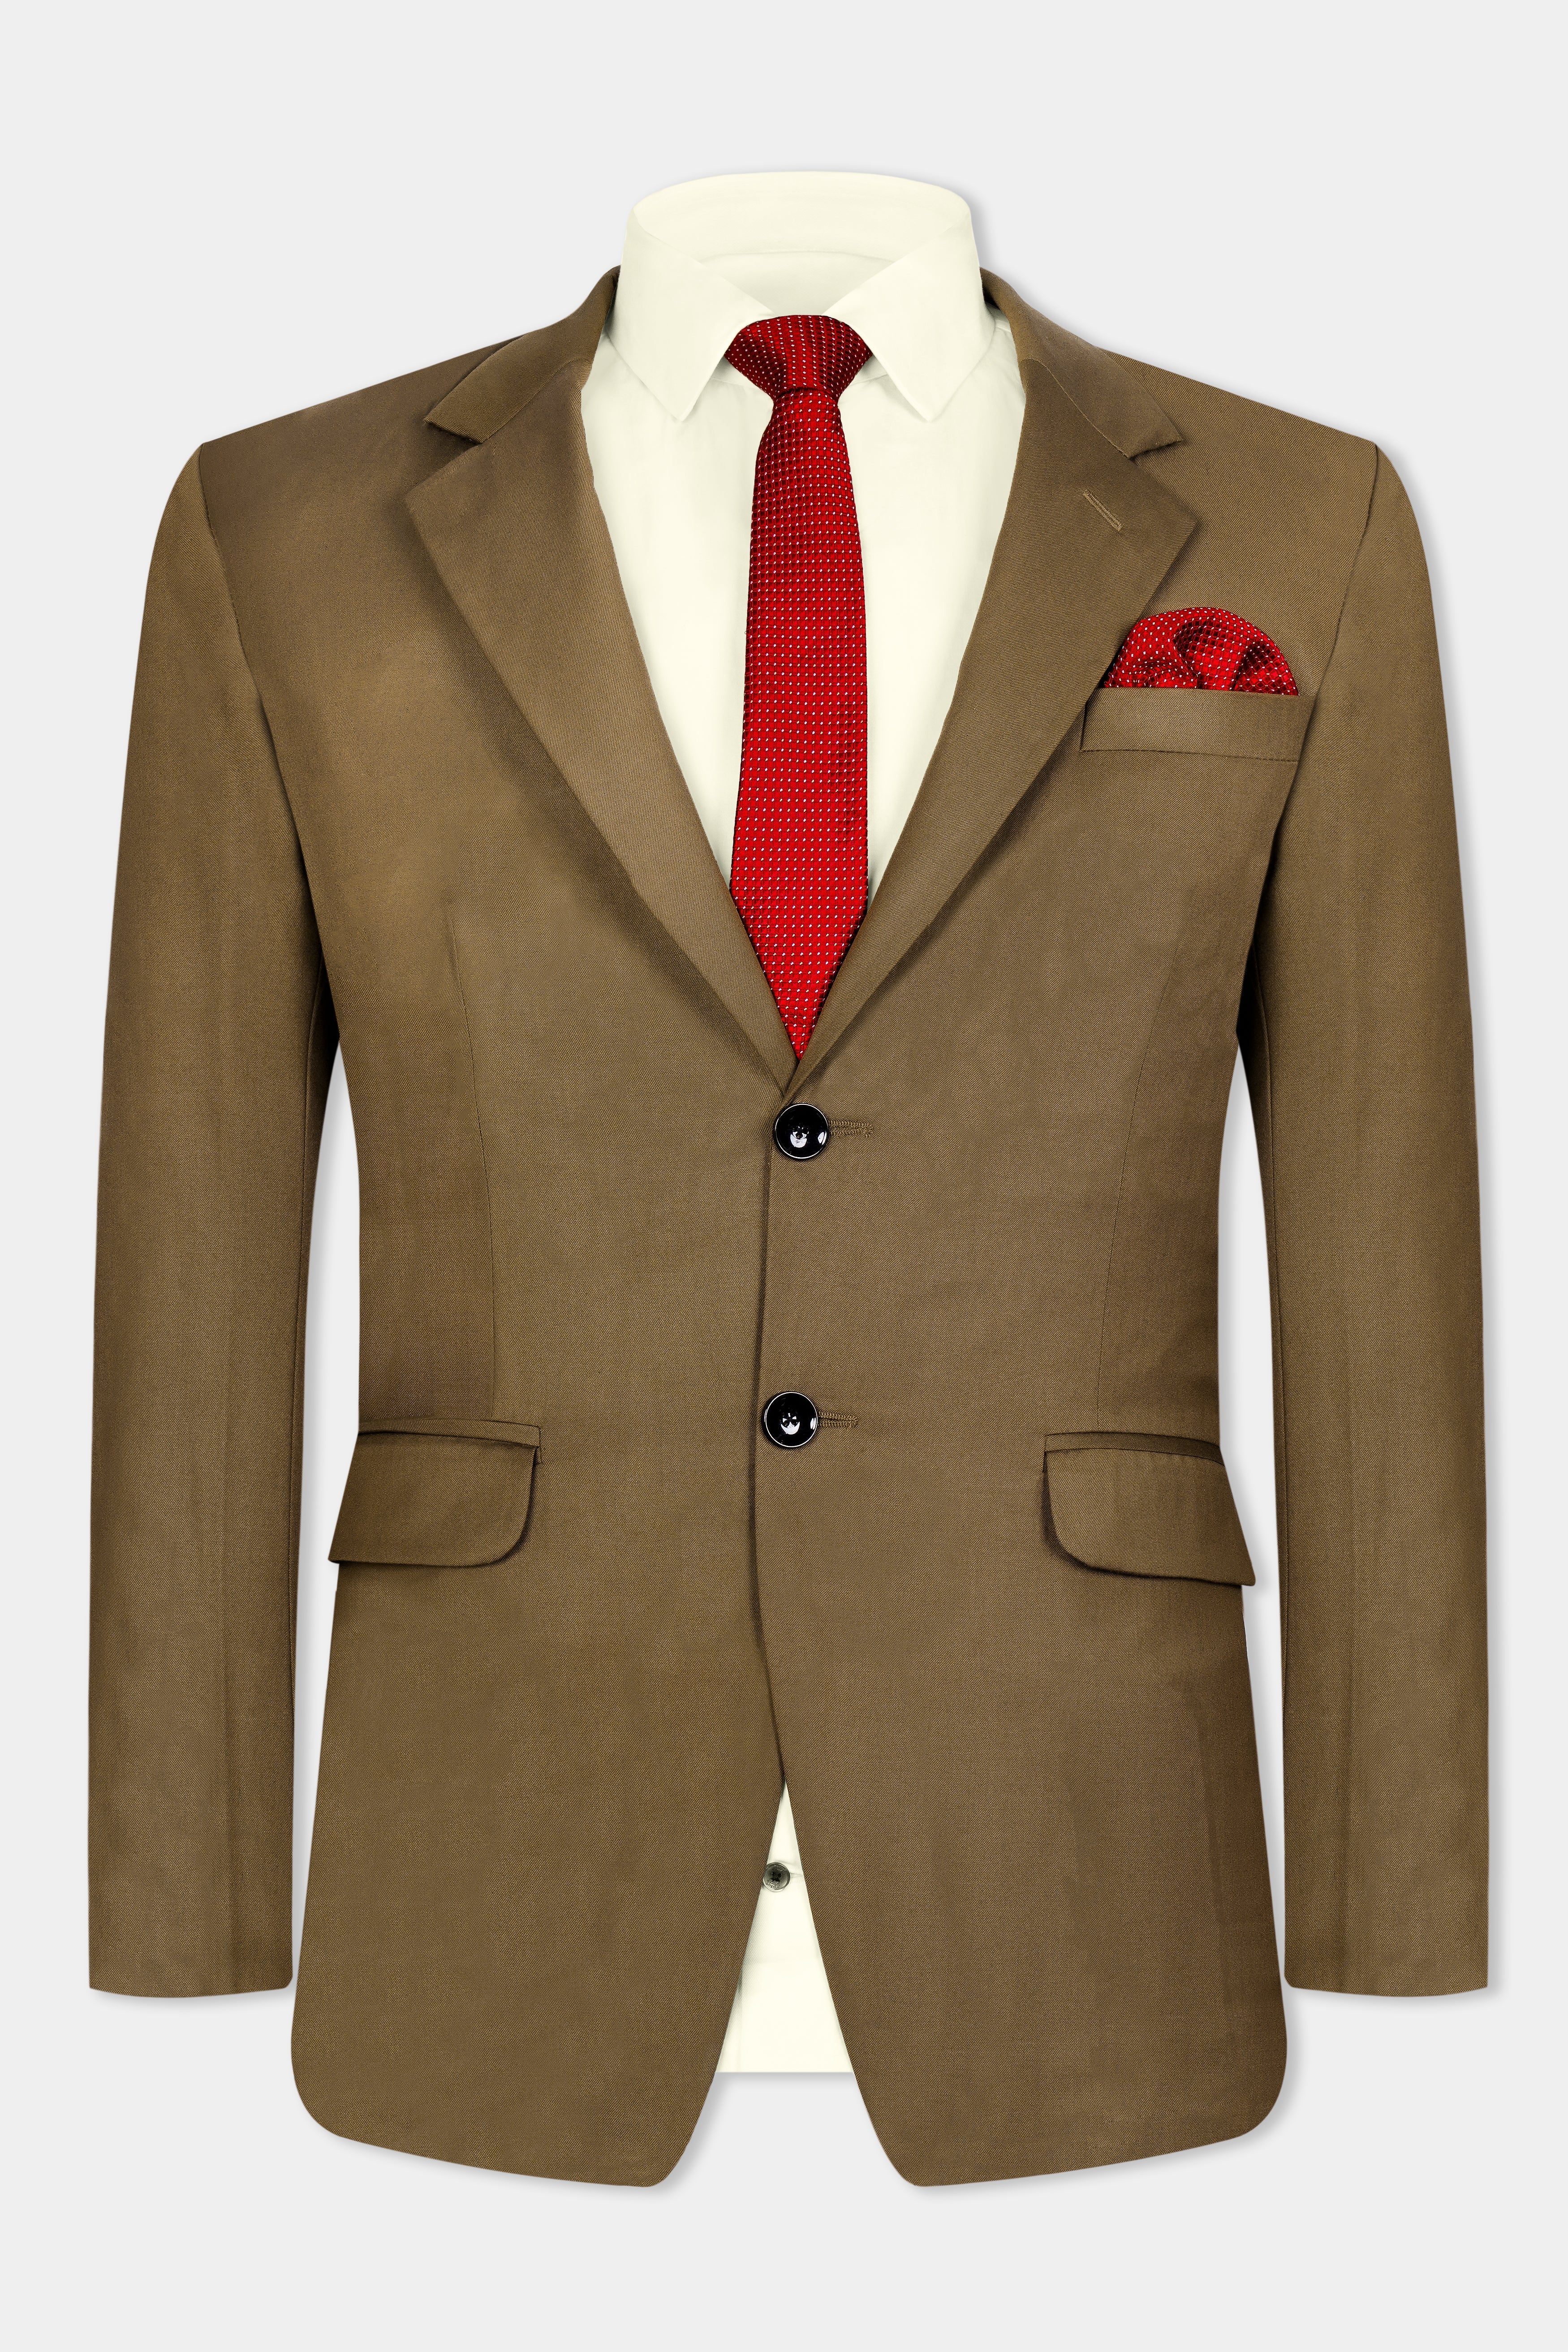 Buy Formal Blazers For Men in India at French Crown